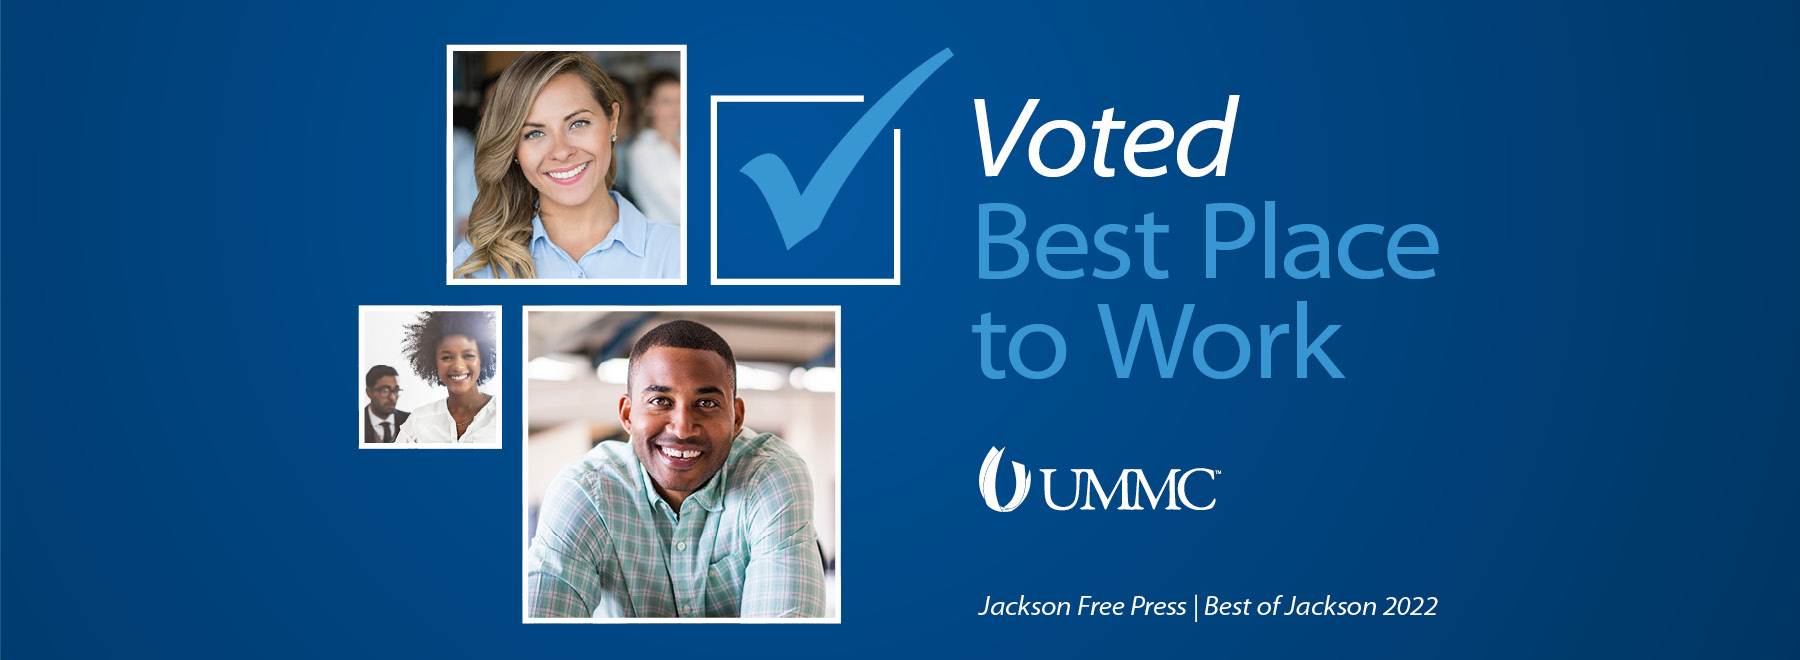 Voted Best Place to Work, Jackson FRee Press Best of Jackson 2022